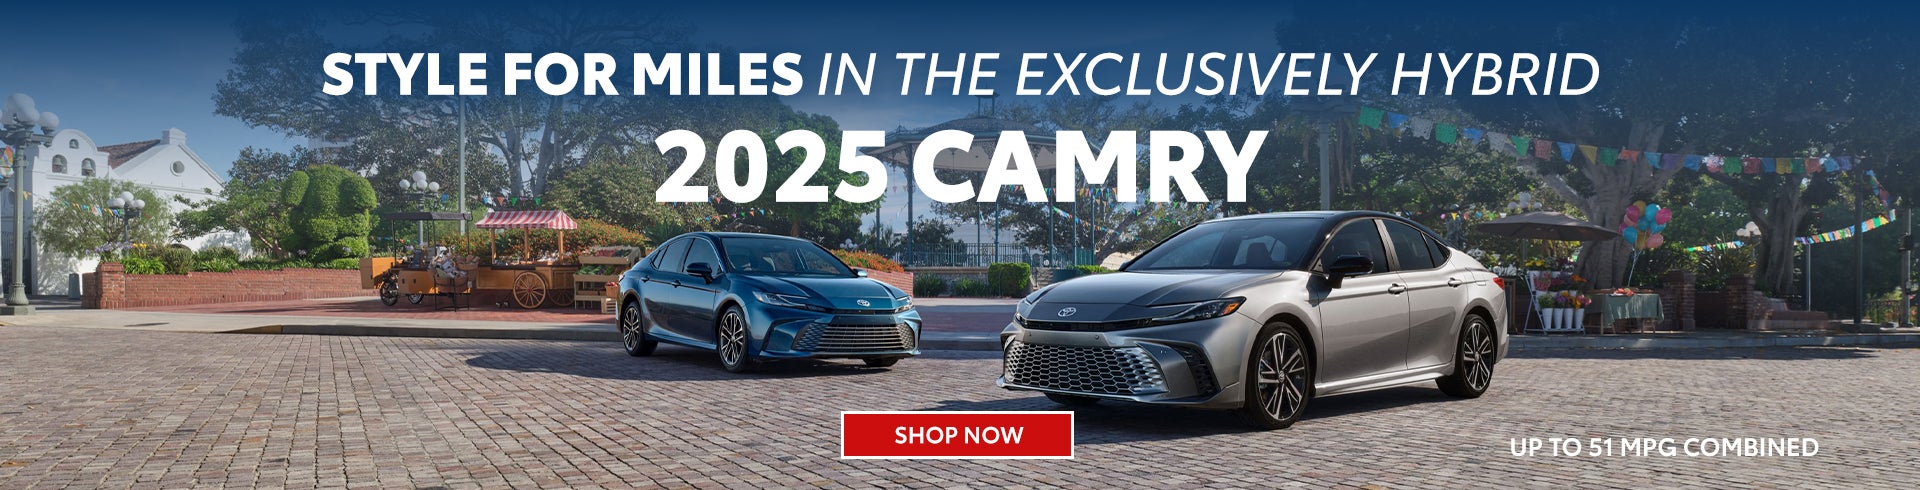 2025 Camry_Shop Now